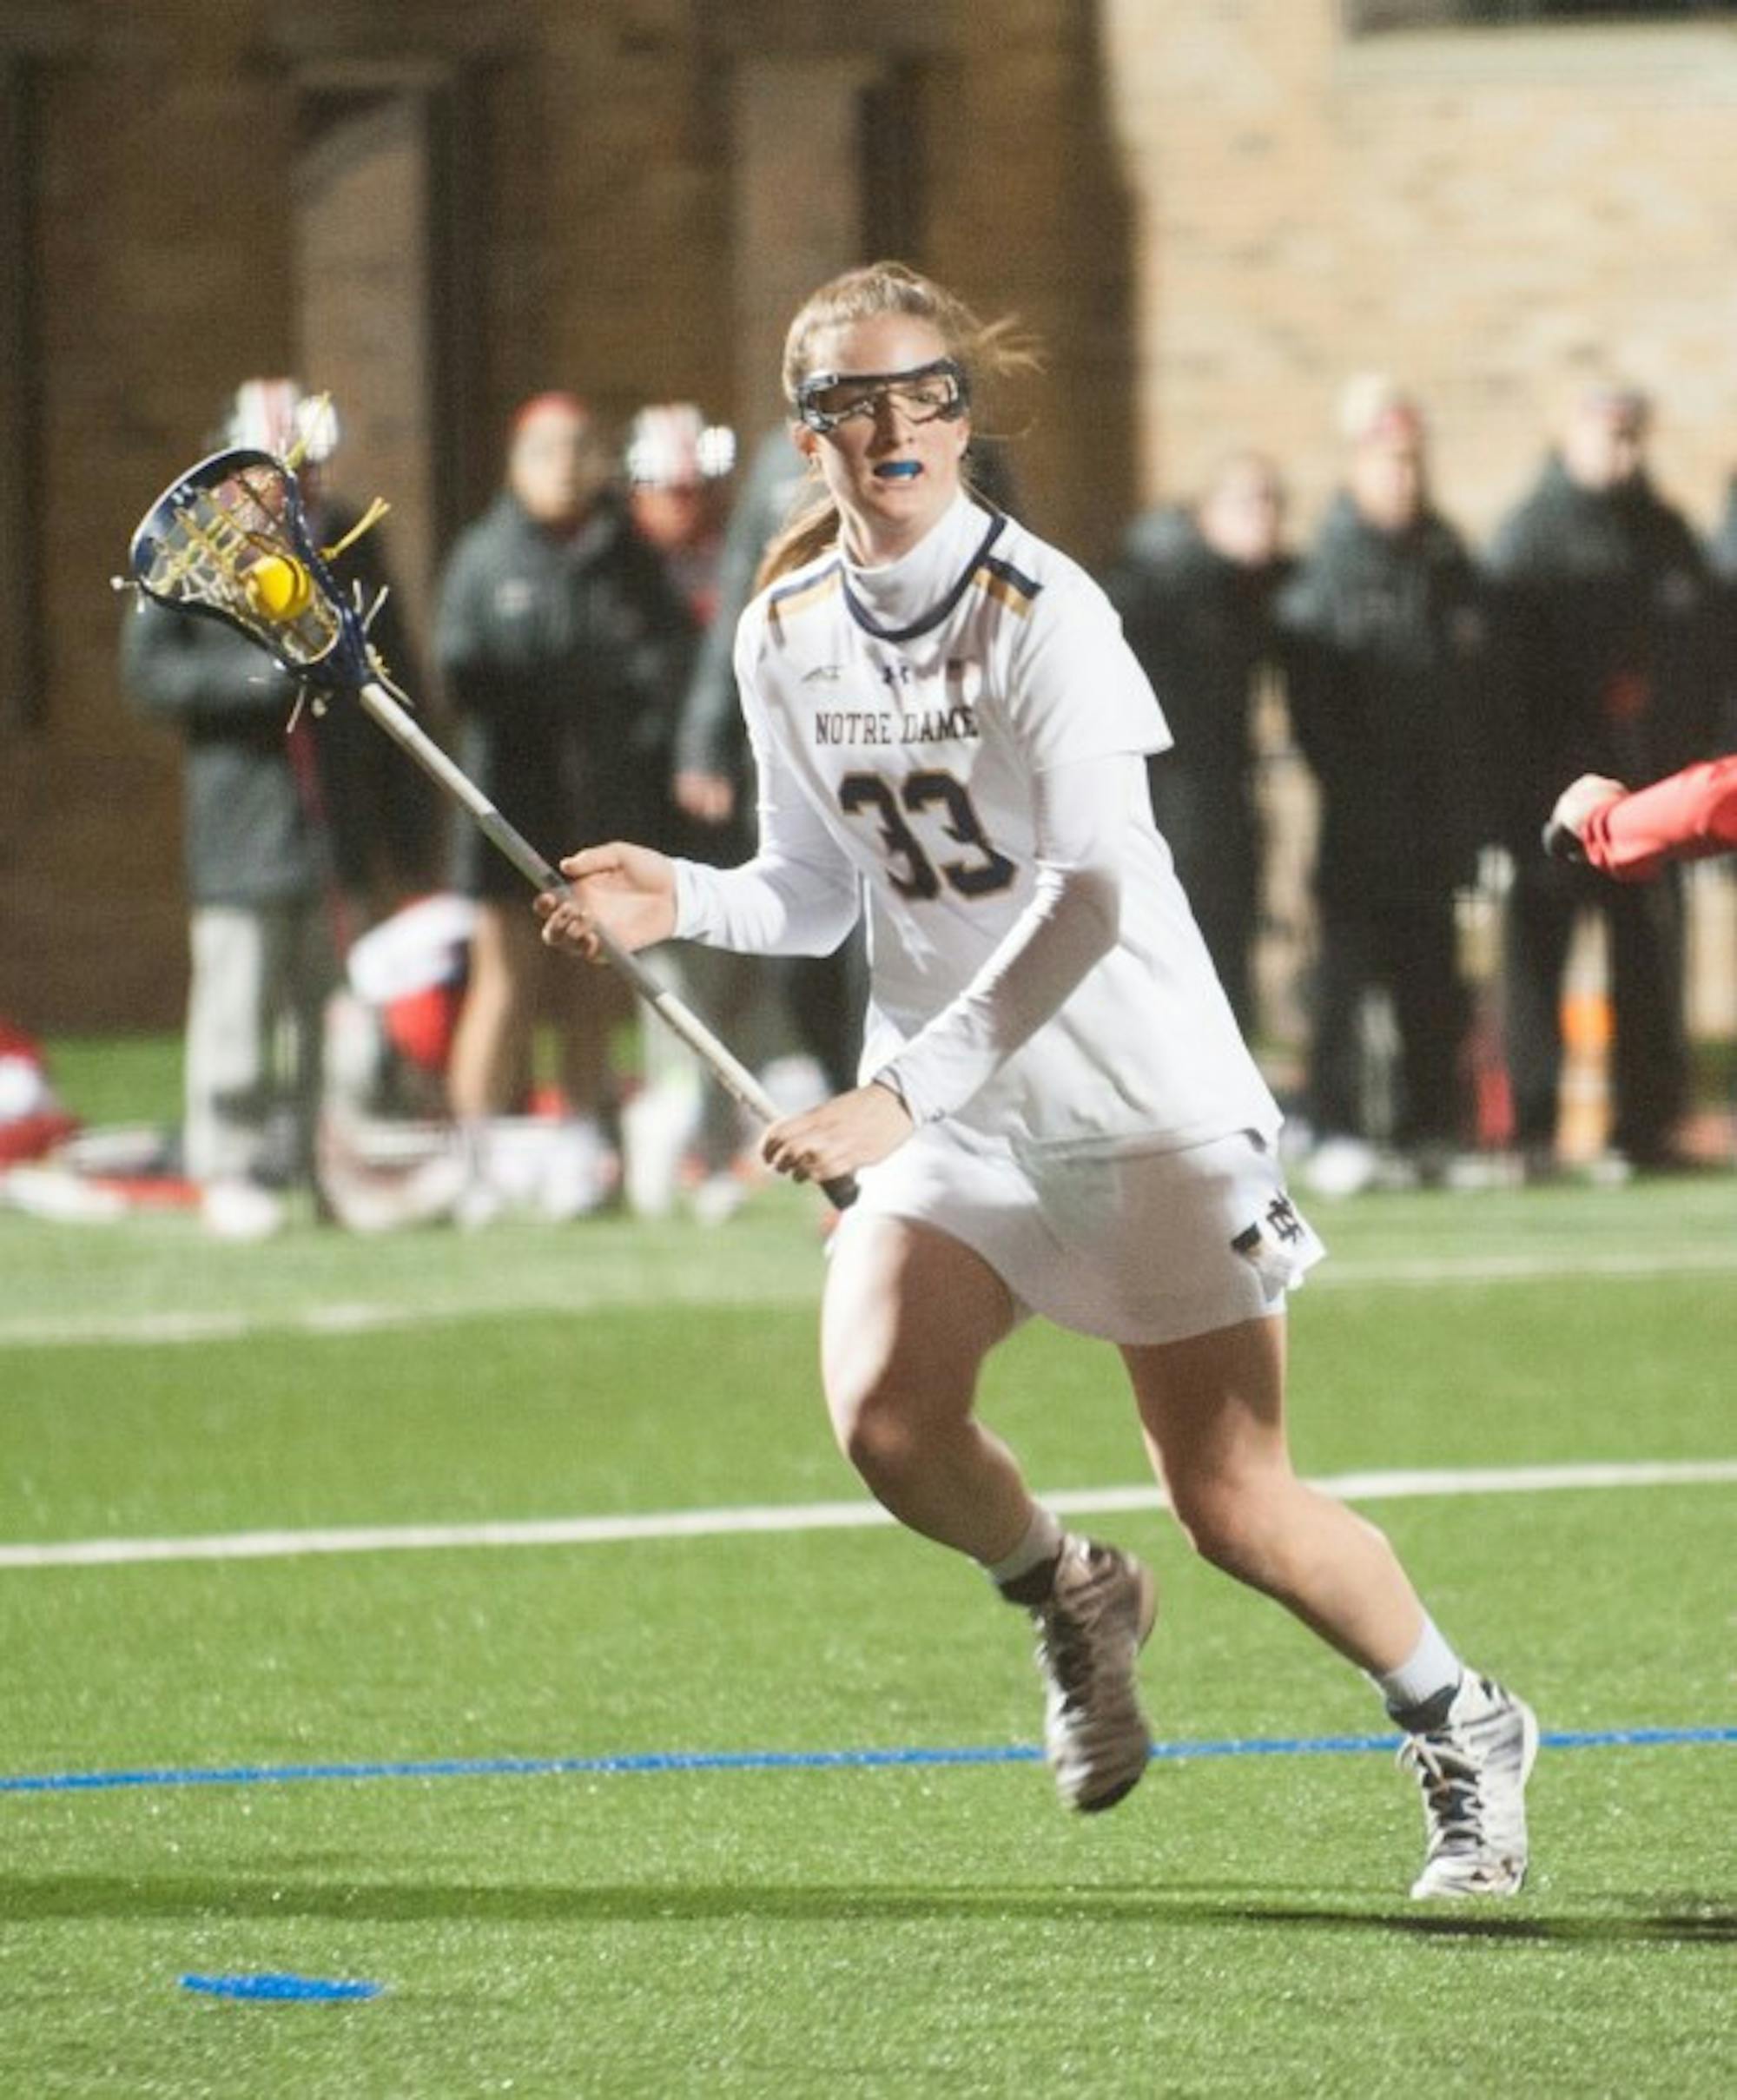 Irish sophomore midfielder Samantha Lynch looks for a teammate during Notre Dame's 16-13 win over Ohio State on March 7 at Arlotta Stadium.